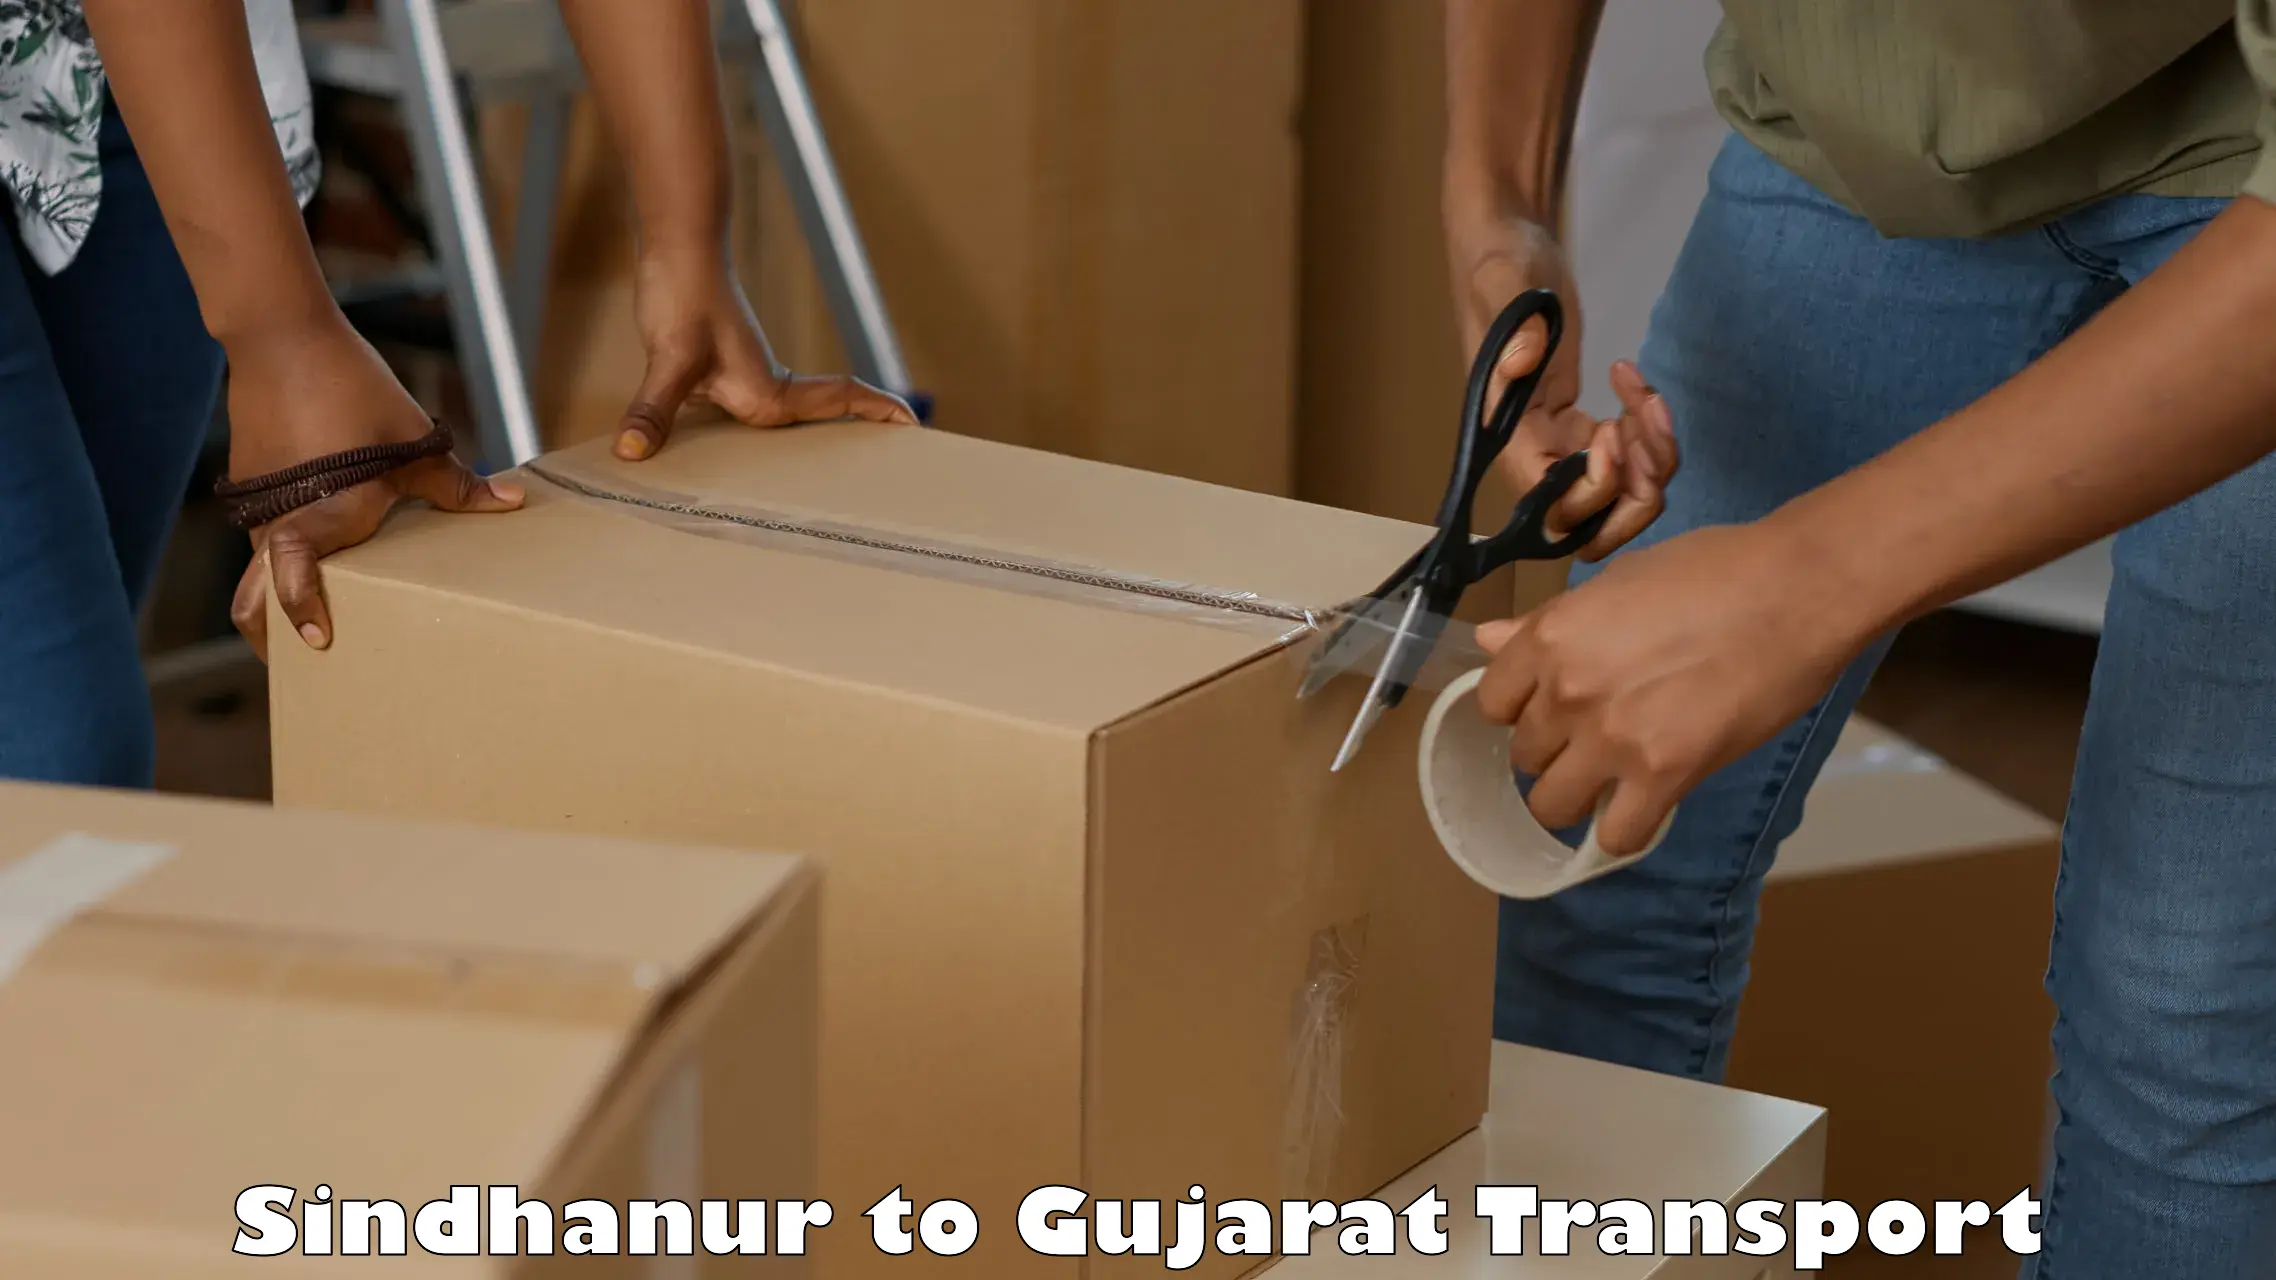 Truck transport companies in India Sindhanur to Ankleshwar